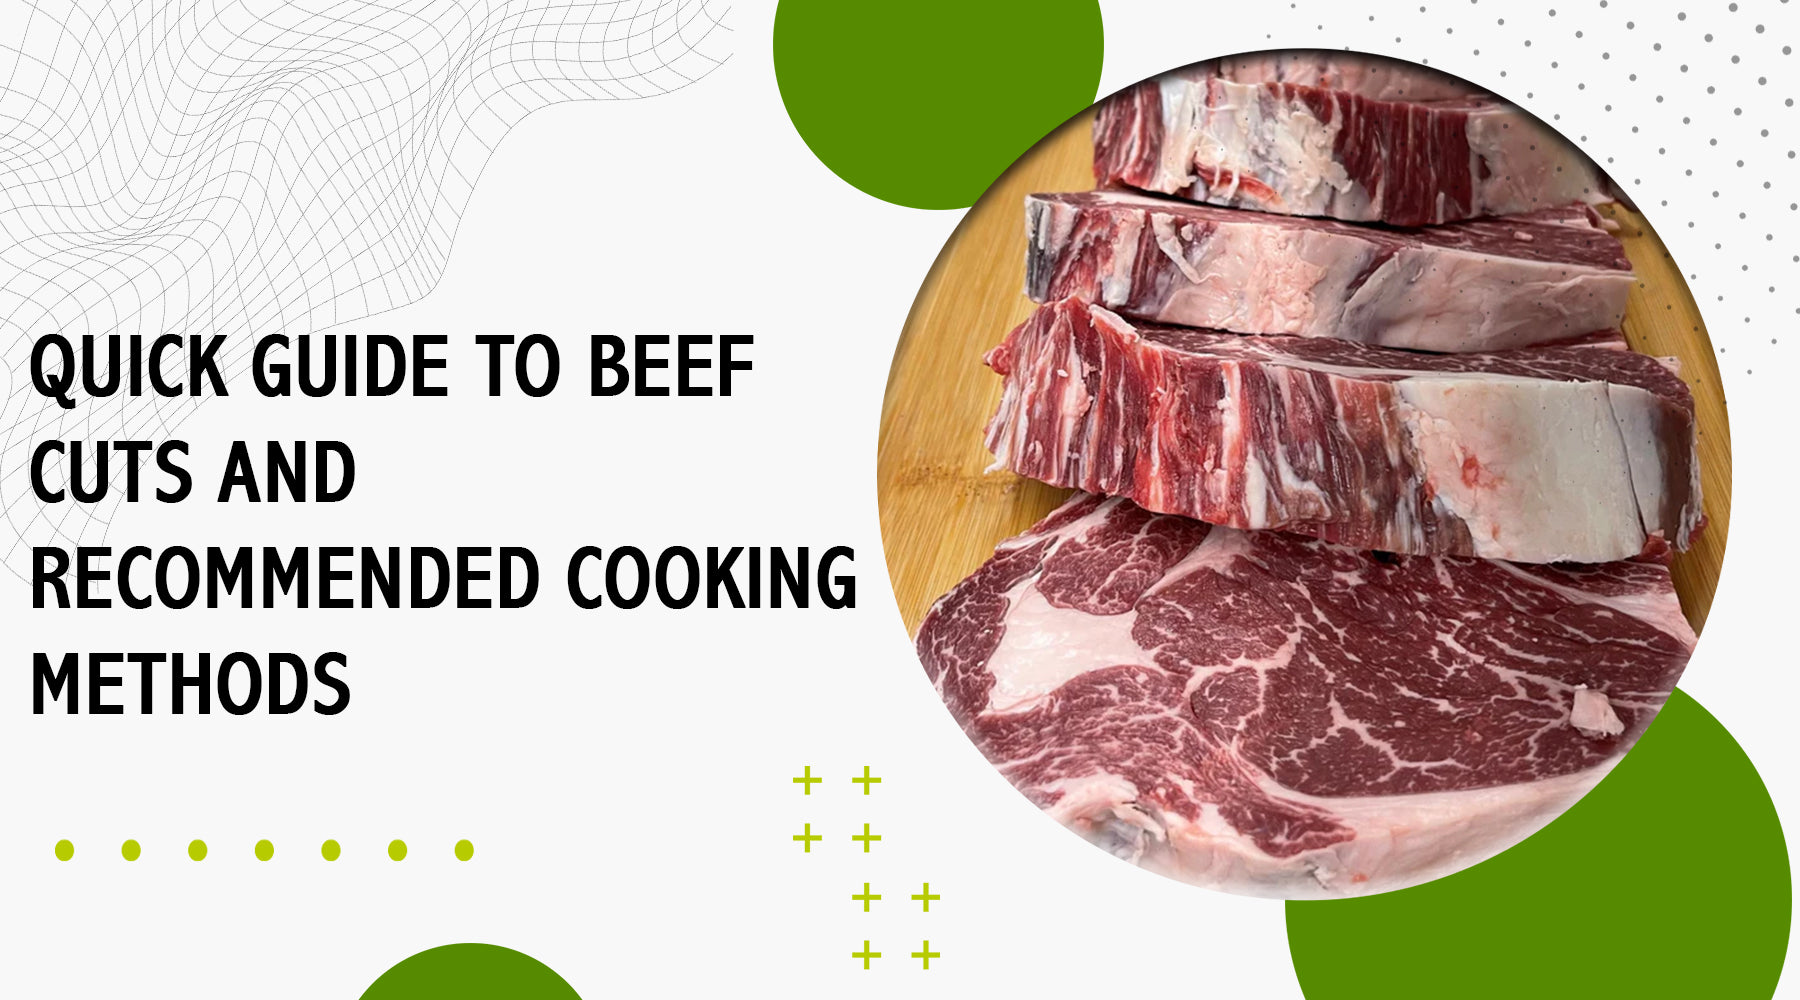 Quick Guide to Beef Cuts and Recommended Cooking Methods 